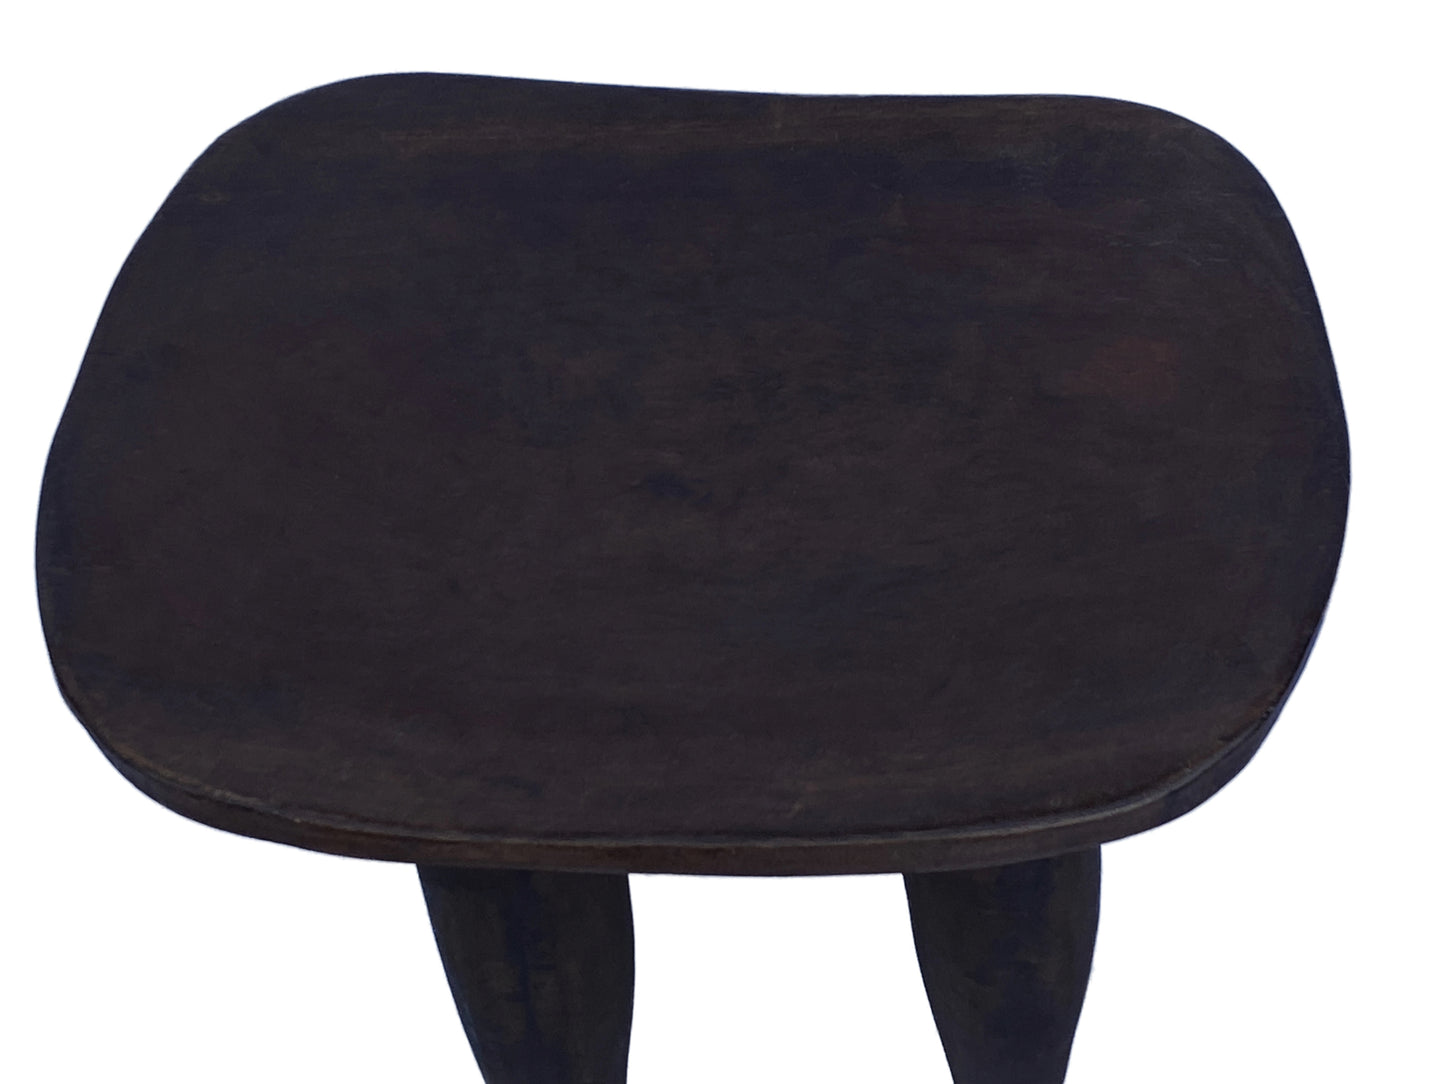 # 4209 Superb African Senufo Stool / Table  I coast 17" H by 22" w